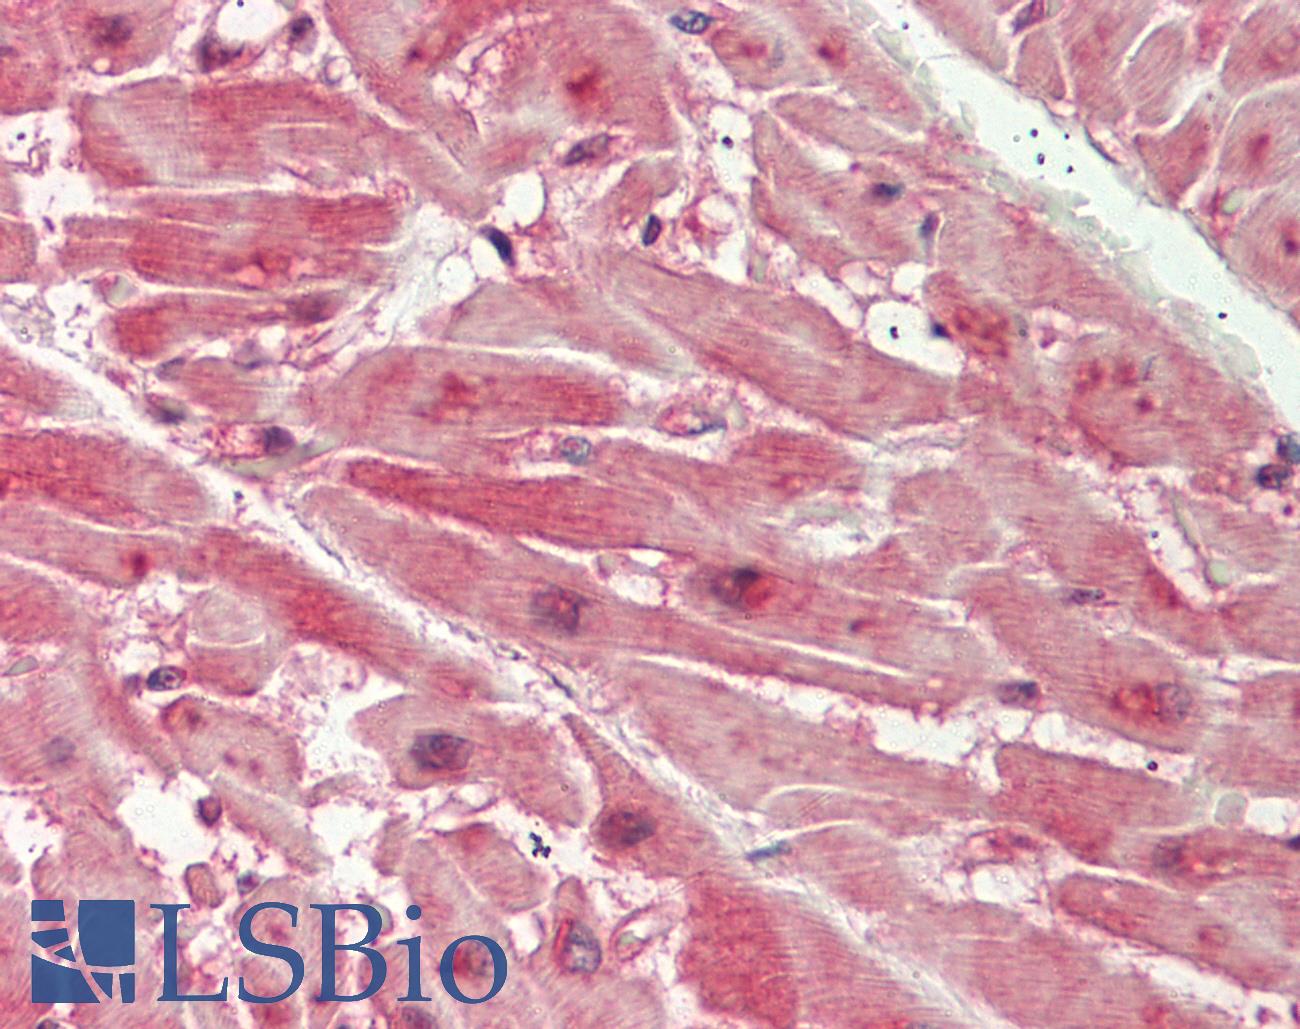 Dipeptidylpeptidase 8 / DPP8 Antibody - Human Heart: Formalin-Fixed, Paraffin-Embedded (FFPE)